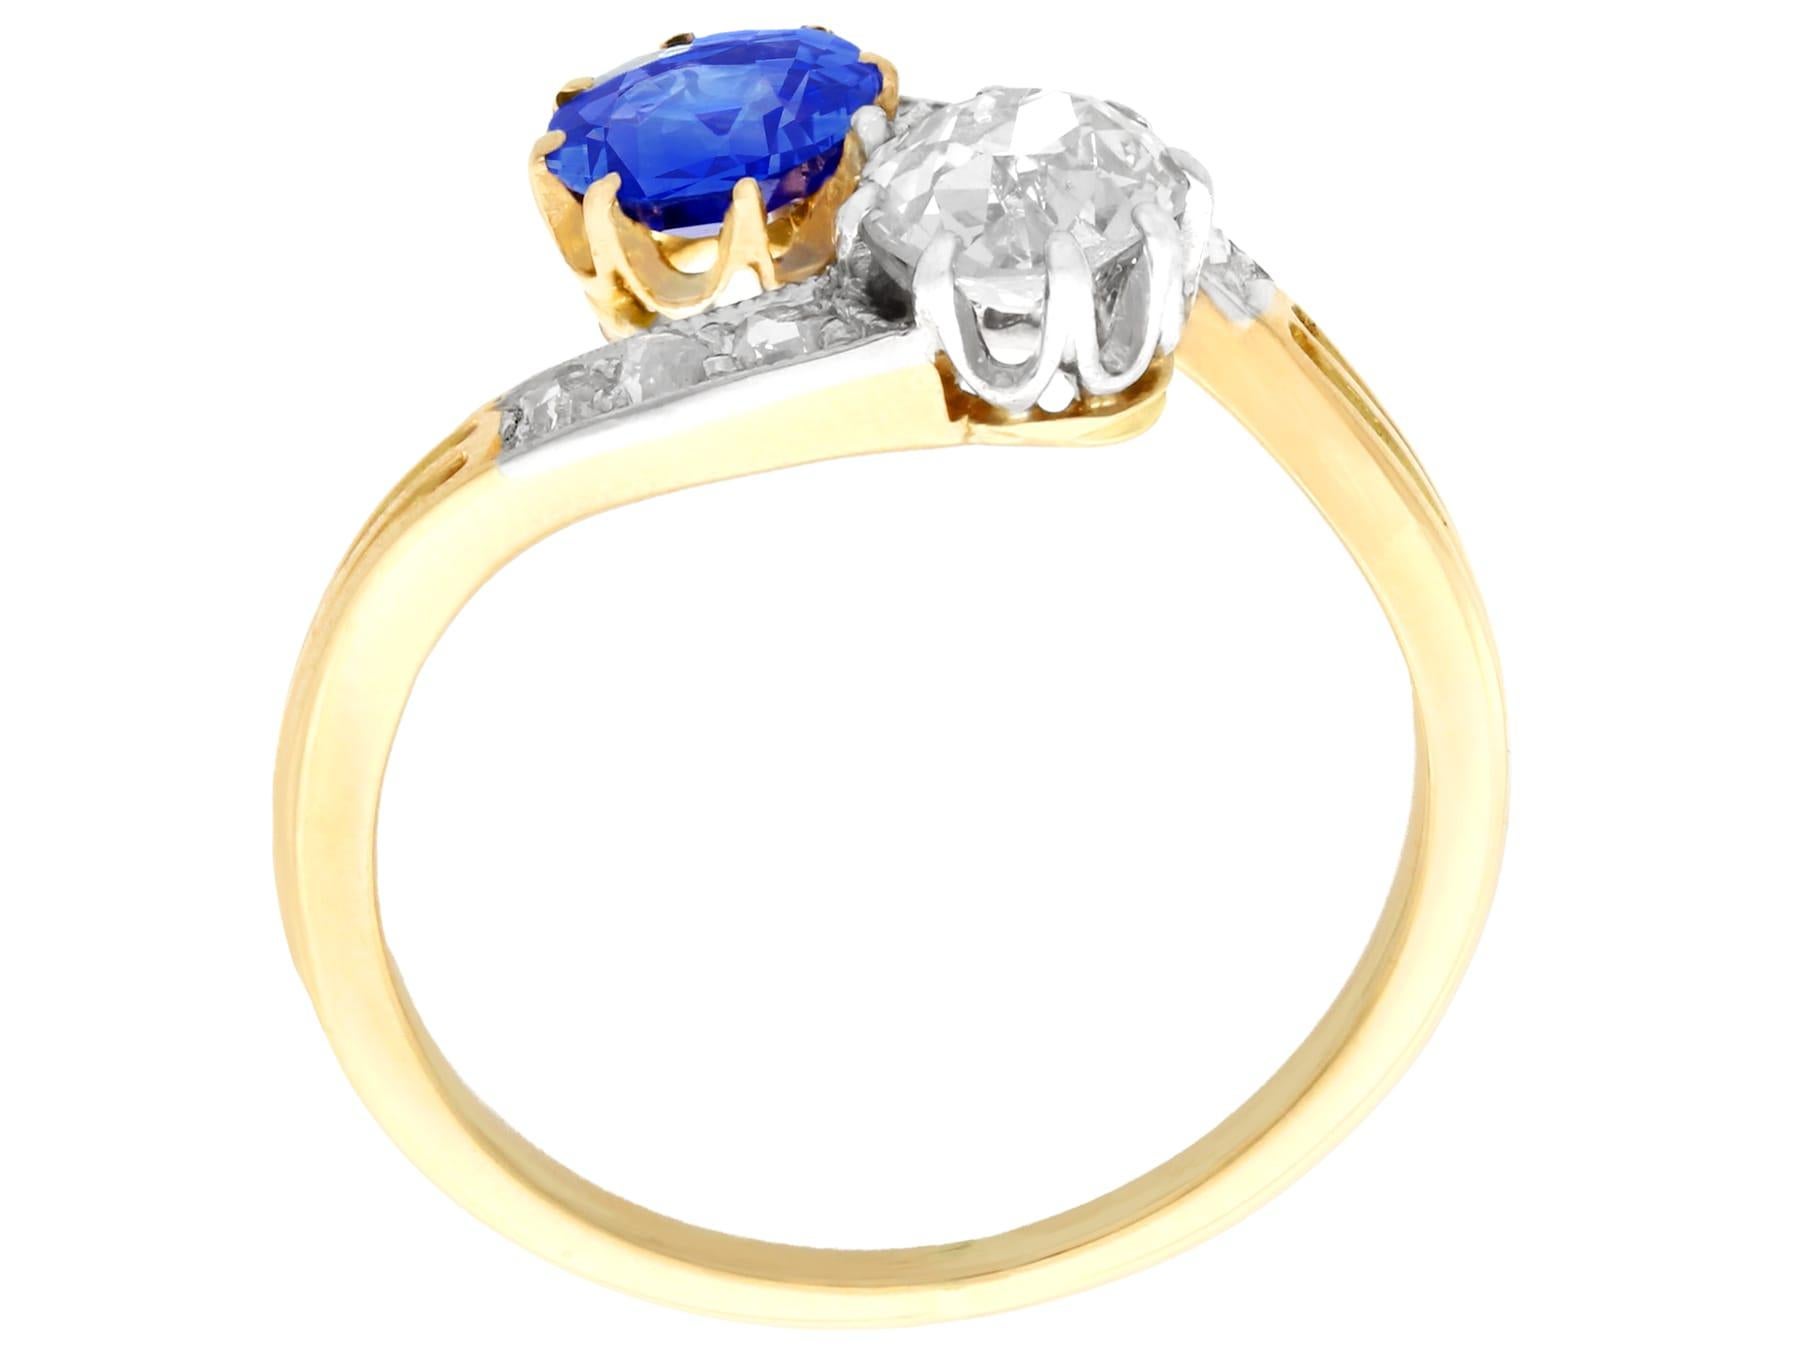 Antique Sapphire and Diamond Yellow Gold Twist Ring In Excellent Condition For Sale In Jesmond, Newcastle Upon Tyne